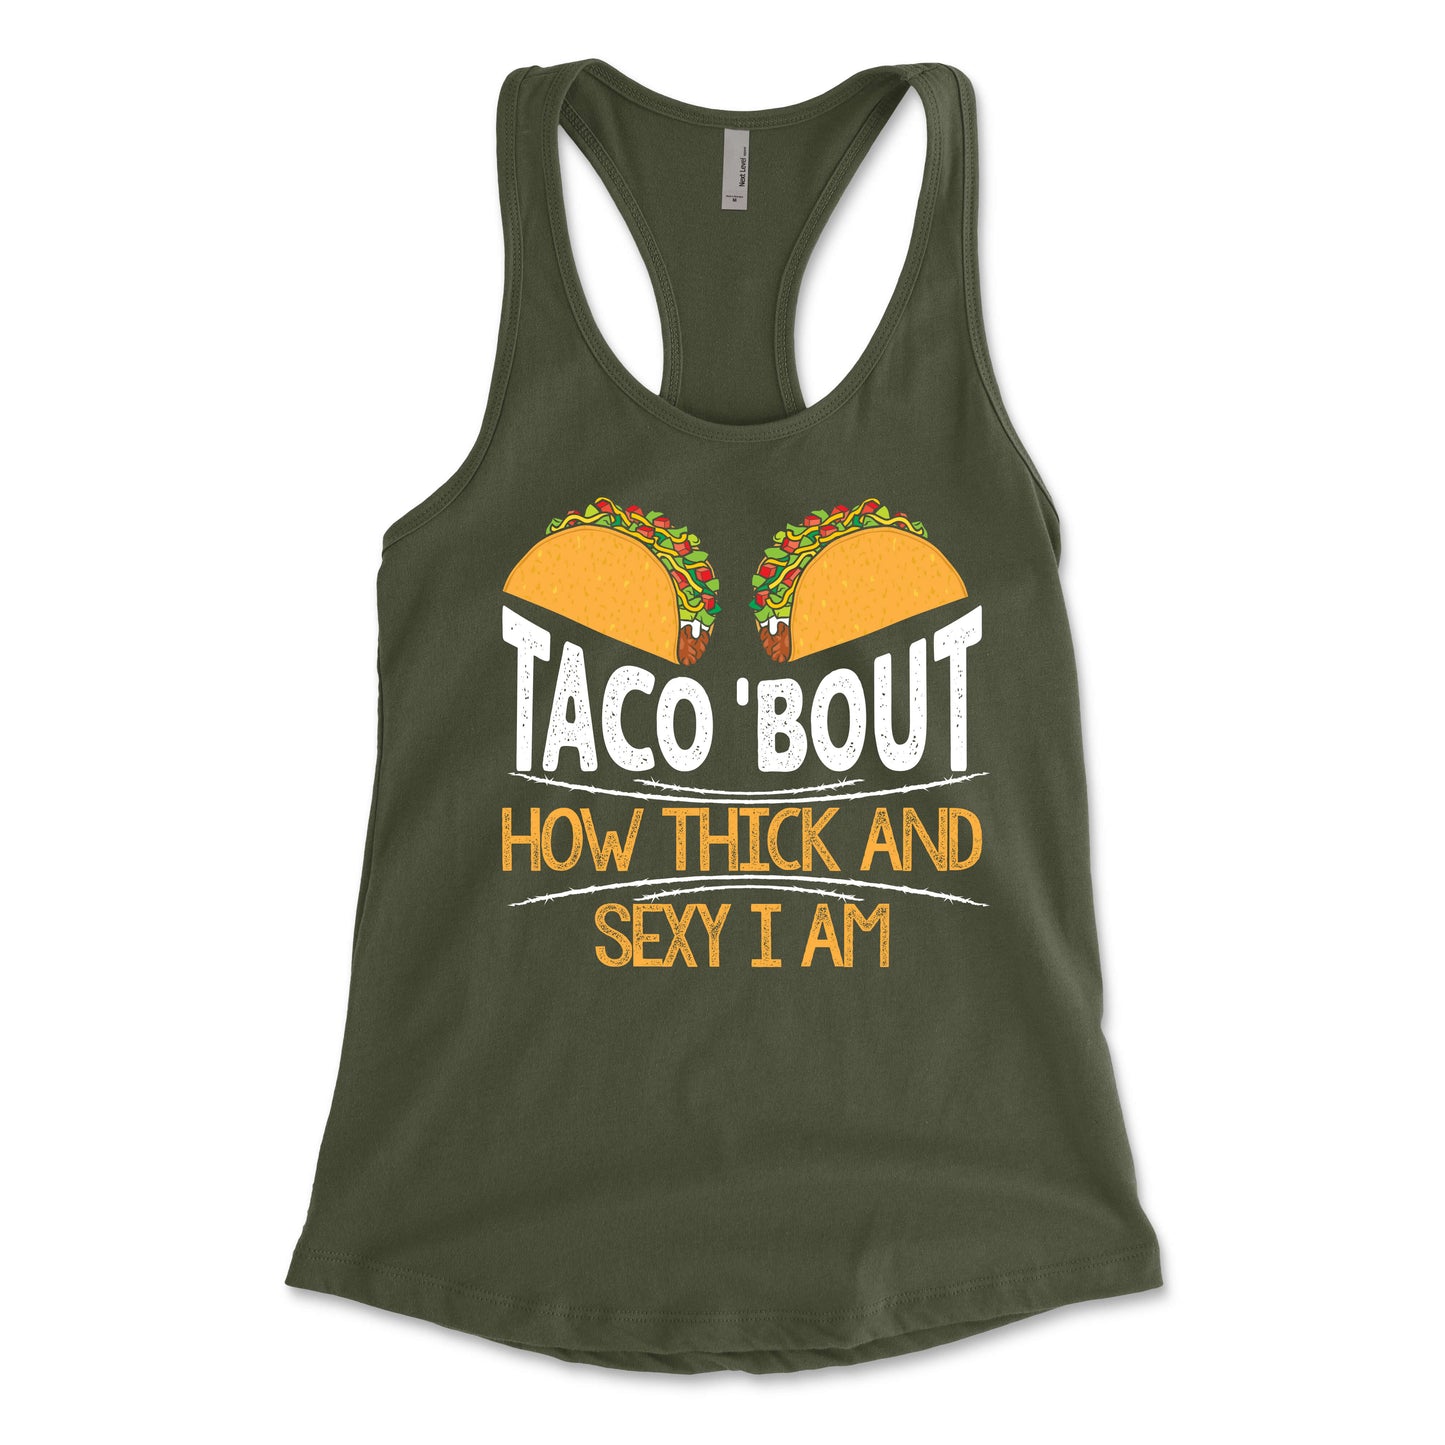 Taco Bout Thick and Sexy Women's Racerback